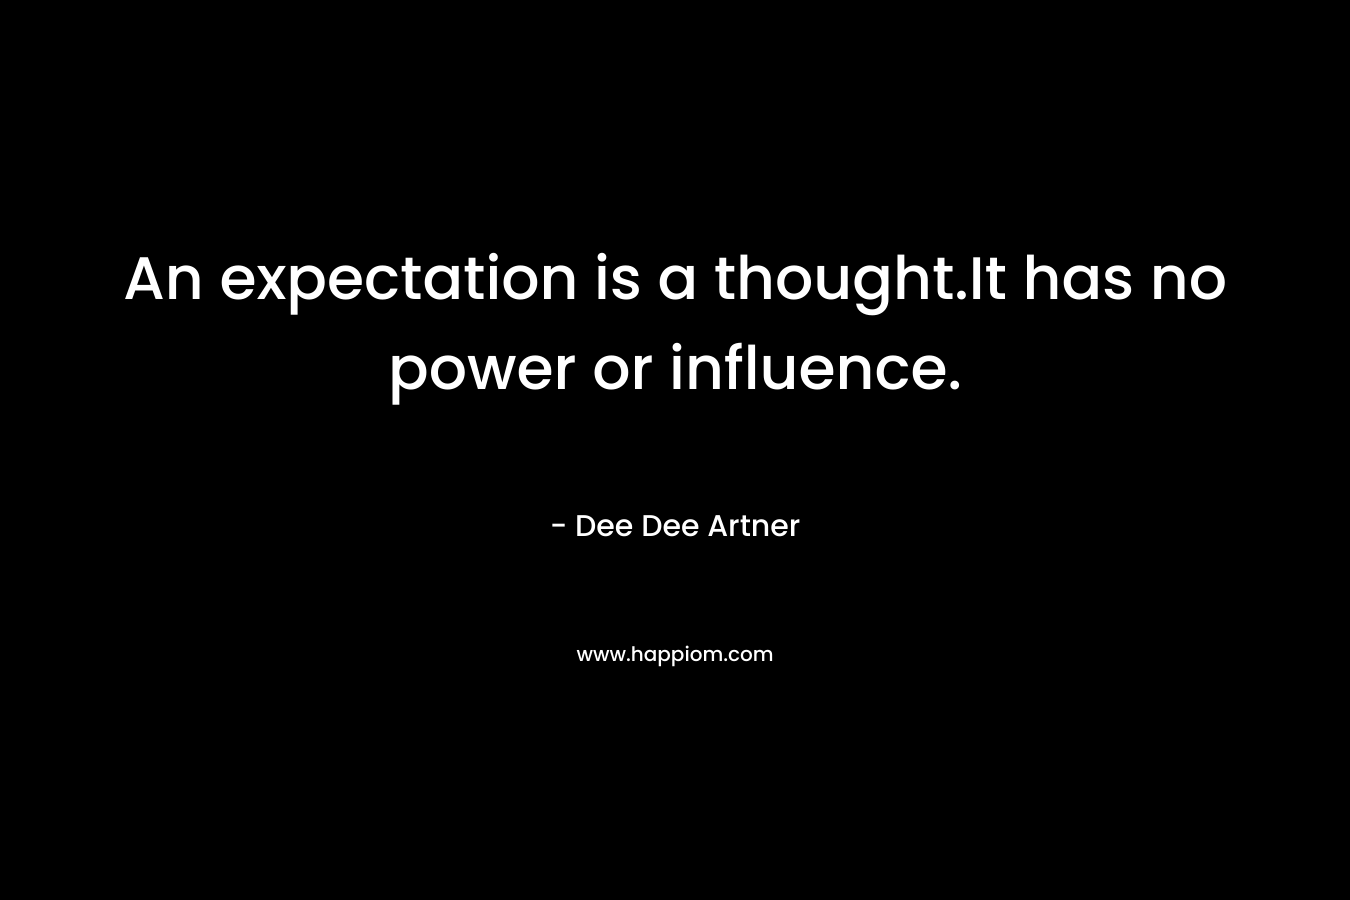 An expectation is a thought.It has no power or influence.